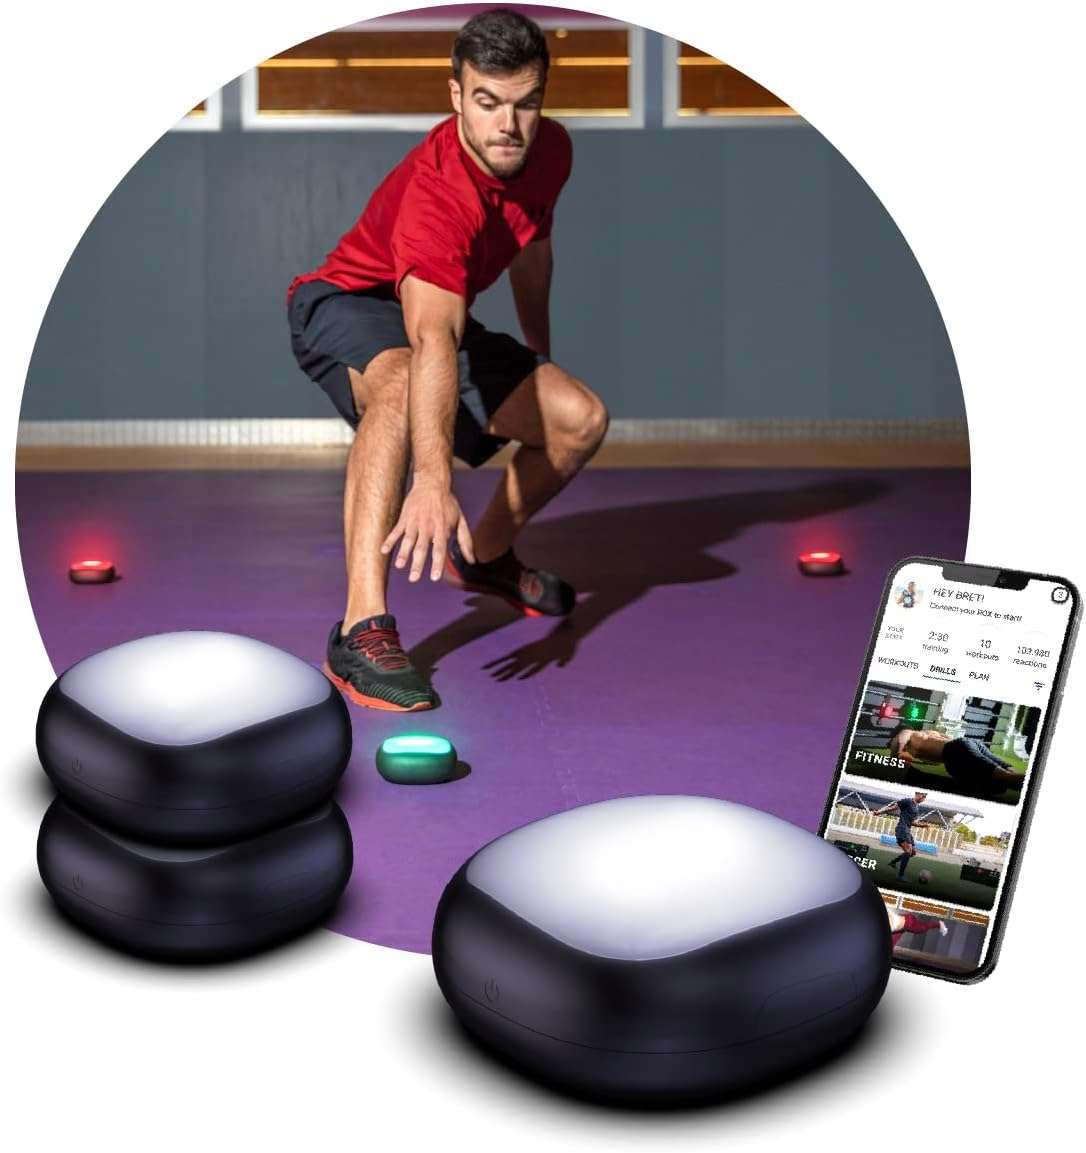 Blazepod Reaction Training Platform Improves Reaction Time And Agility For  Athletes, Trainers, Coaches, Physical & Neurological Therapists, Fitness